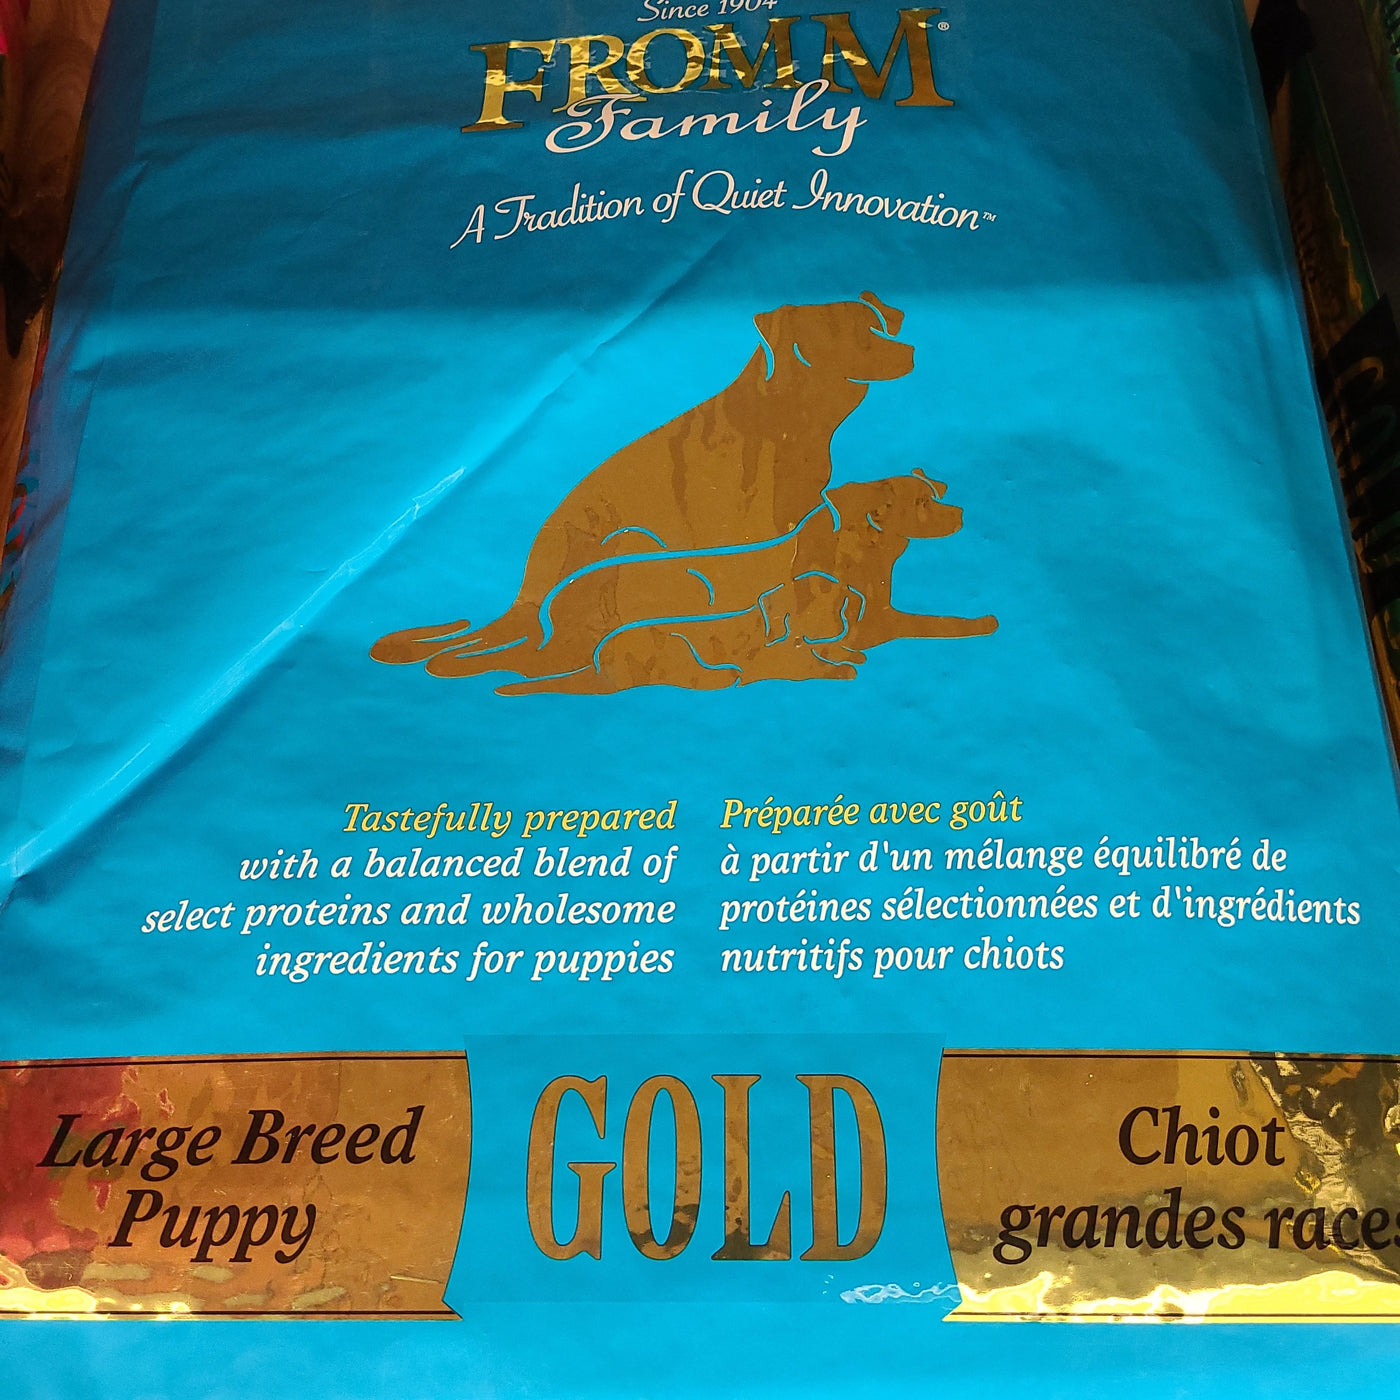 Fromm Puppy Gold Dry Dog Food